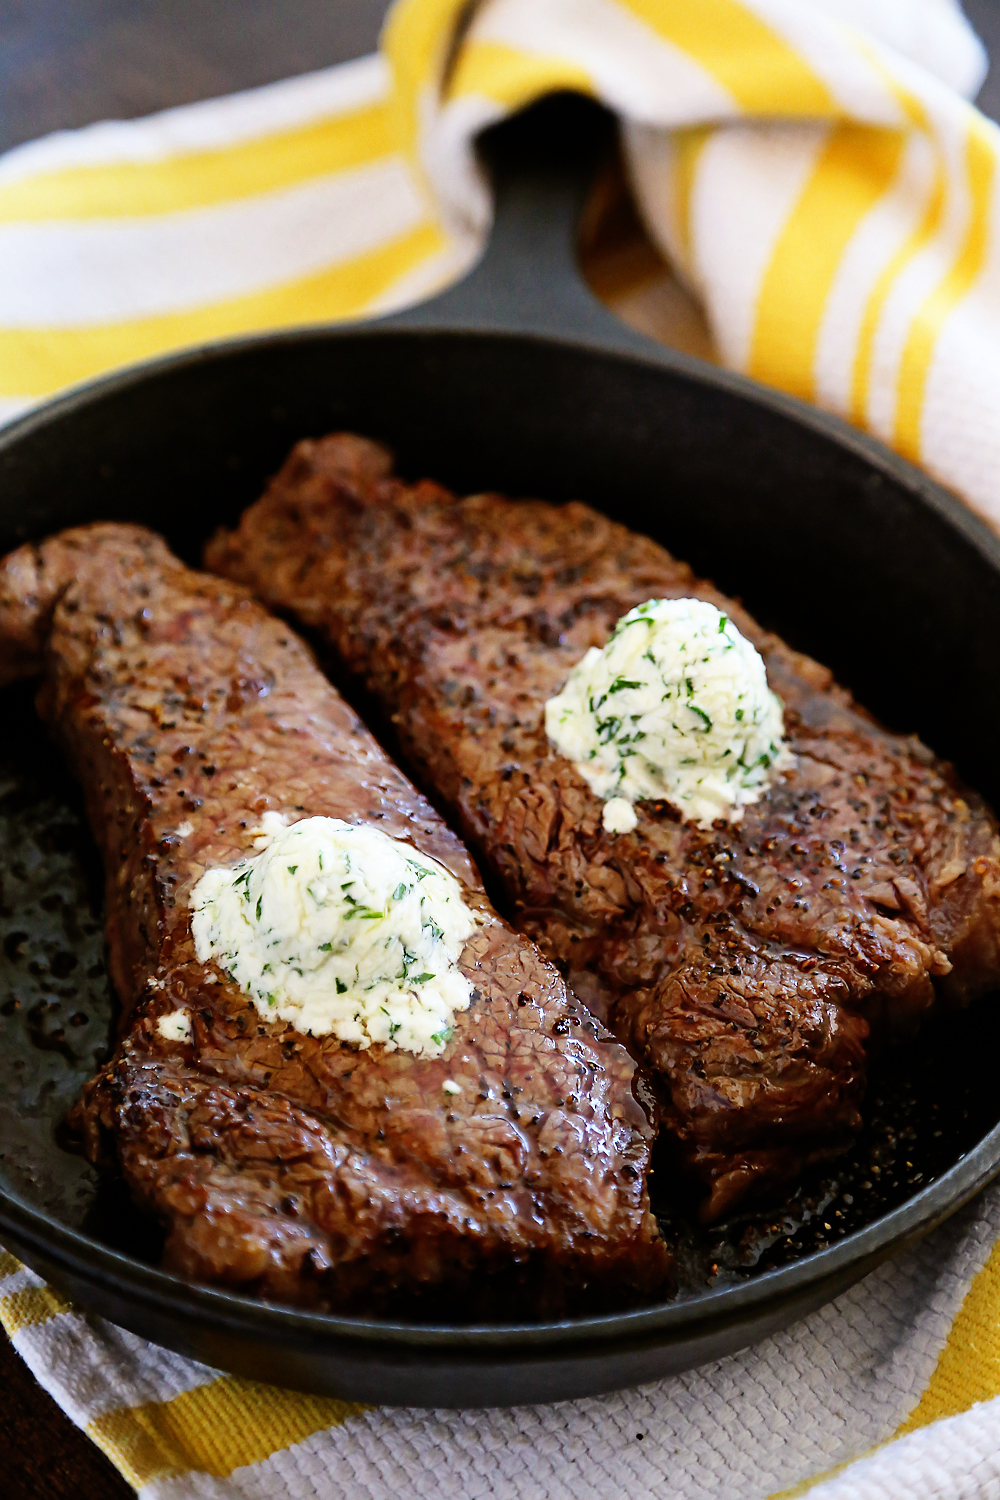 Skillet Steaks with Gorgonzola Herb Butter – Best steak we’ve ever cooked at home! Sizzle in a skillet + top with a creamy gorgonzola herb butter. | thecomfortofcooking.com